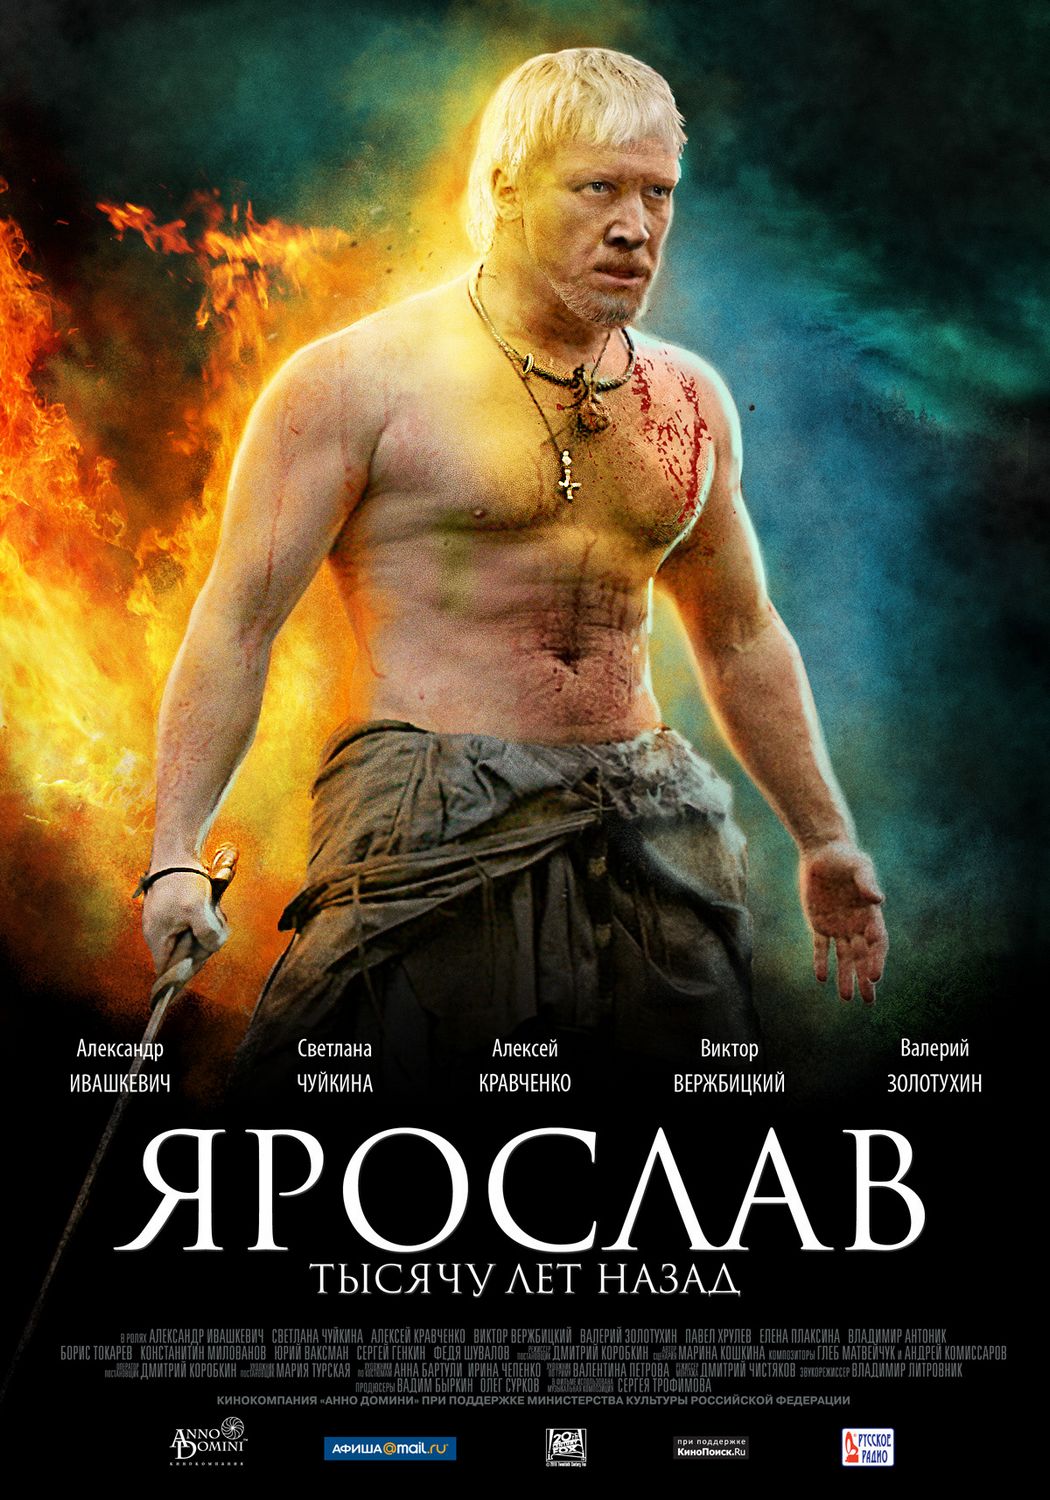 Extra Large Movie Poster Image for Yaroslav (#2 of 5)